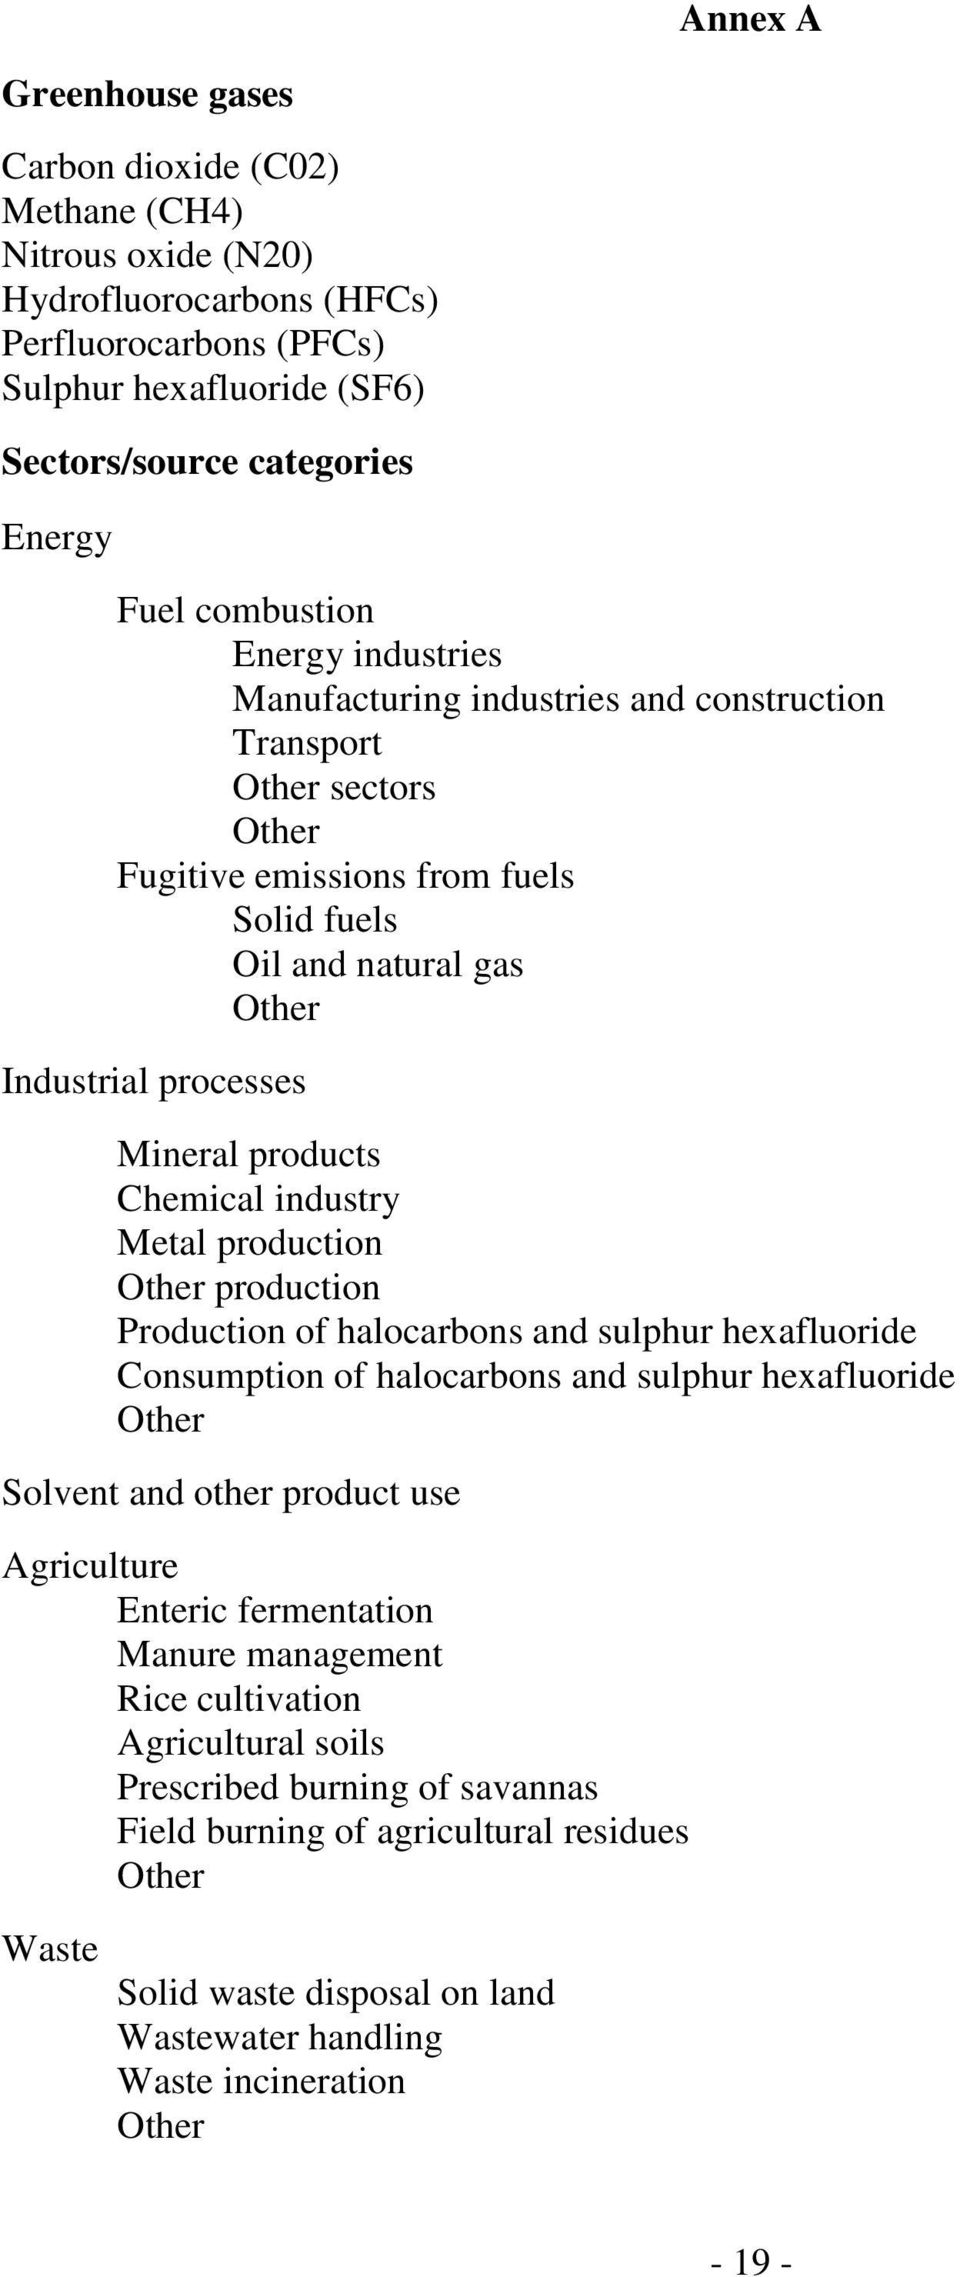 products Chemical industry Metal production Other production Production of halocarbons and sulphur hexafluoride Consumption of halocarbons and sulphur hexafluoride Other Solvent and other product use